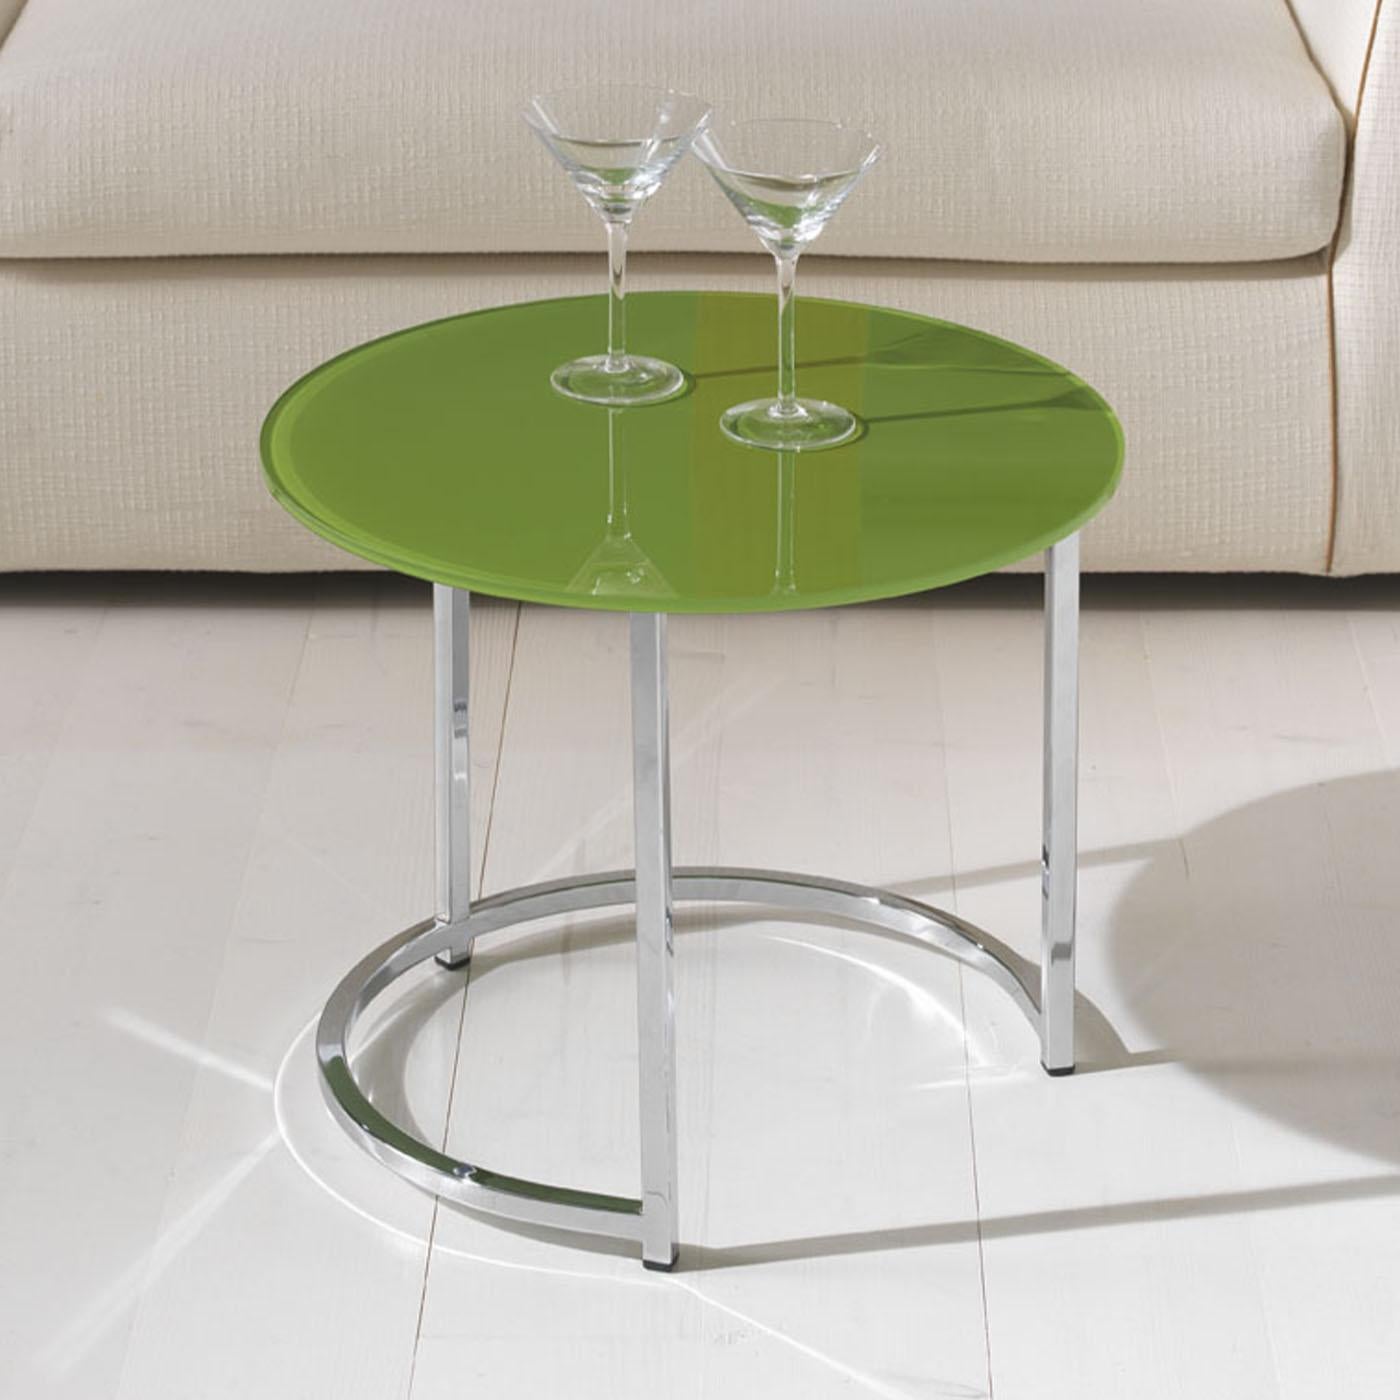 Designed by Danilo Bonfanti & Gabriele Moscatelli, this coffee table is an expression of artistry and innovation. Crafted with a sleek metal frame, the tabletop features a painted glass surface elegantly supported by a chrome structure. Available in